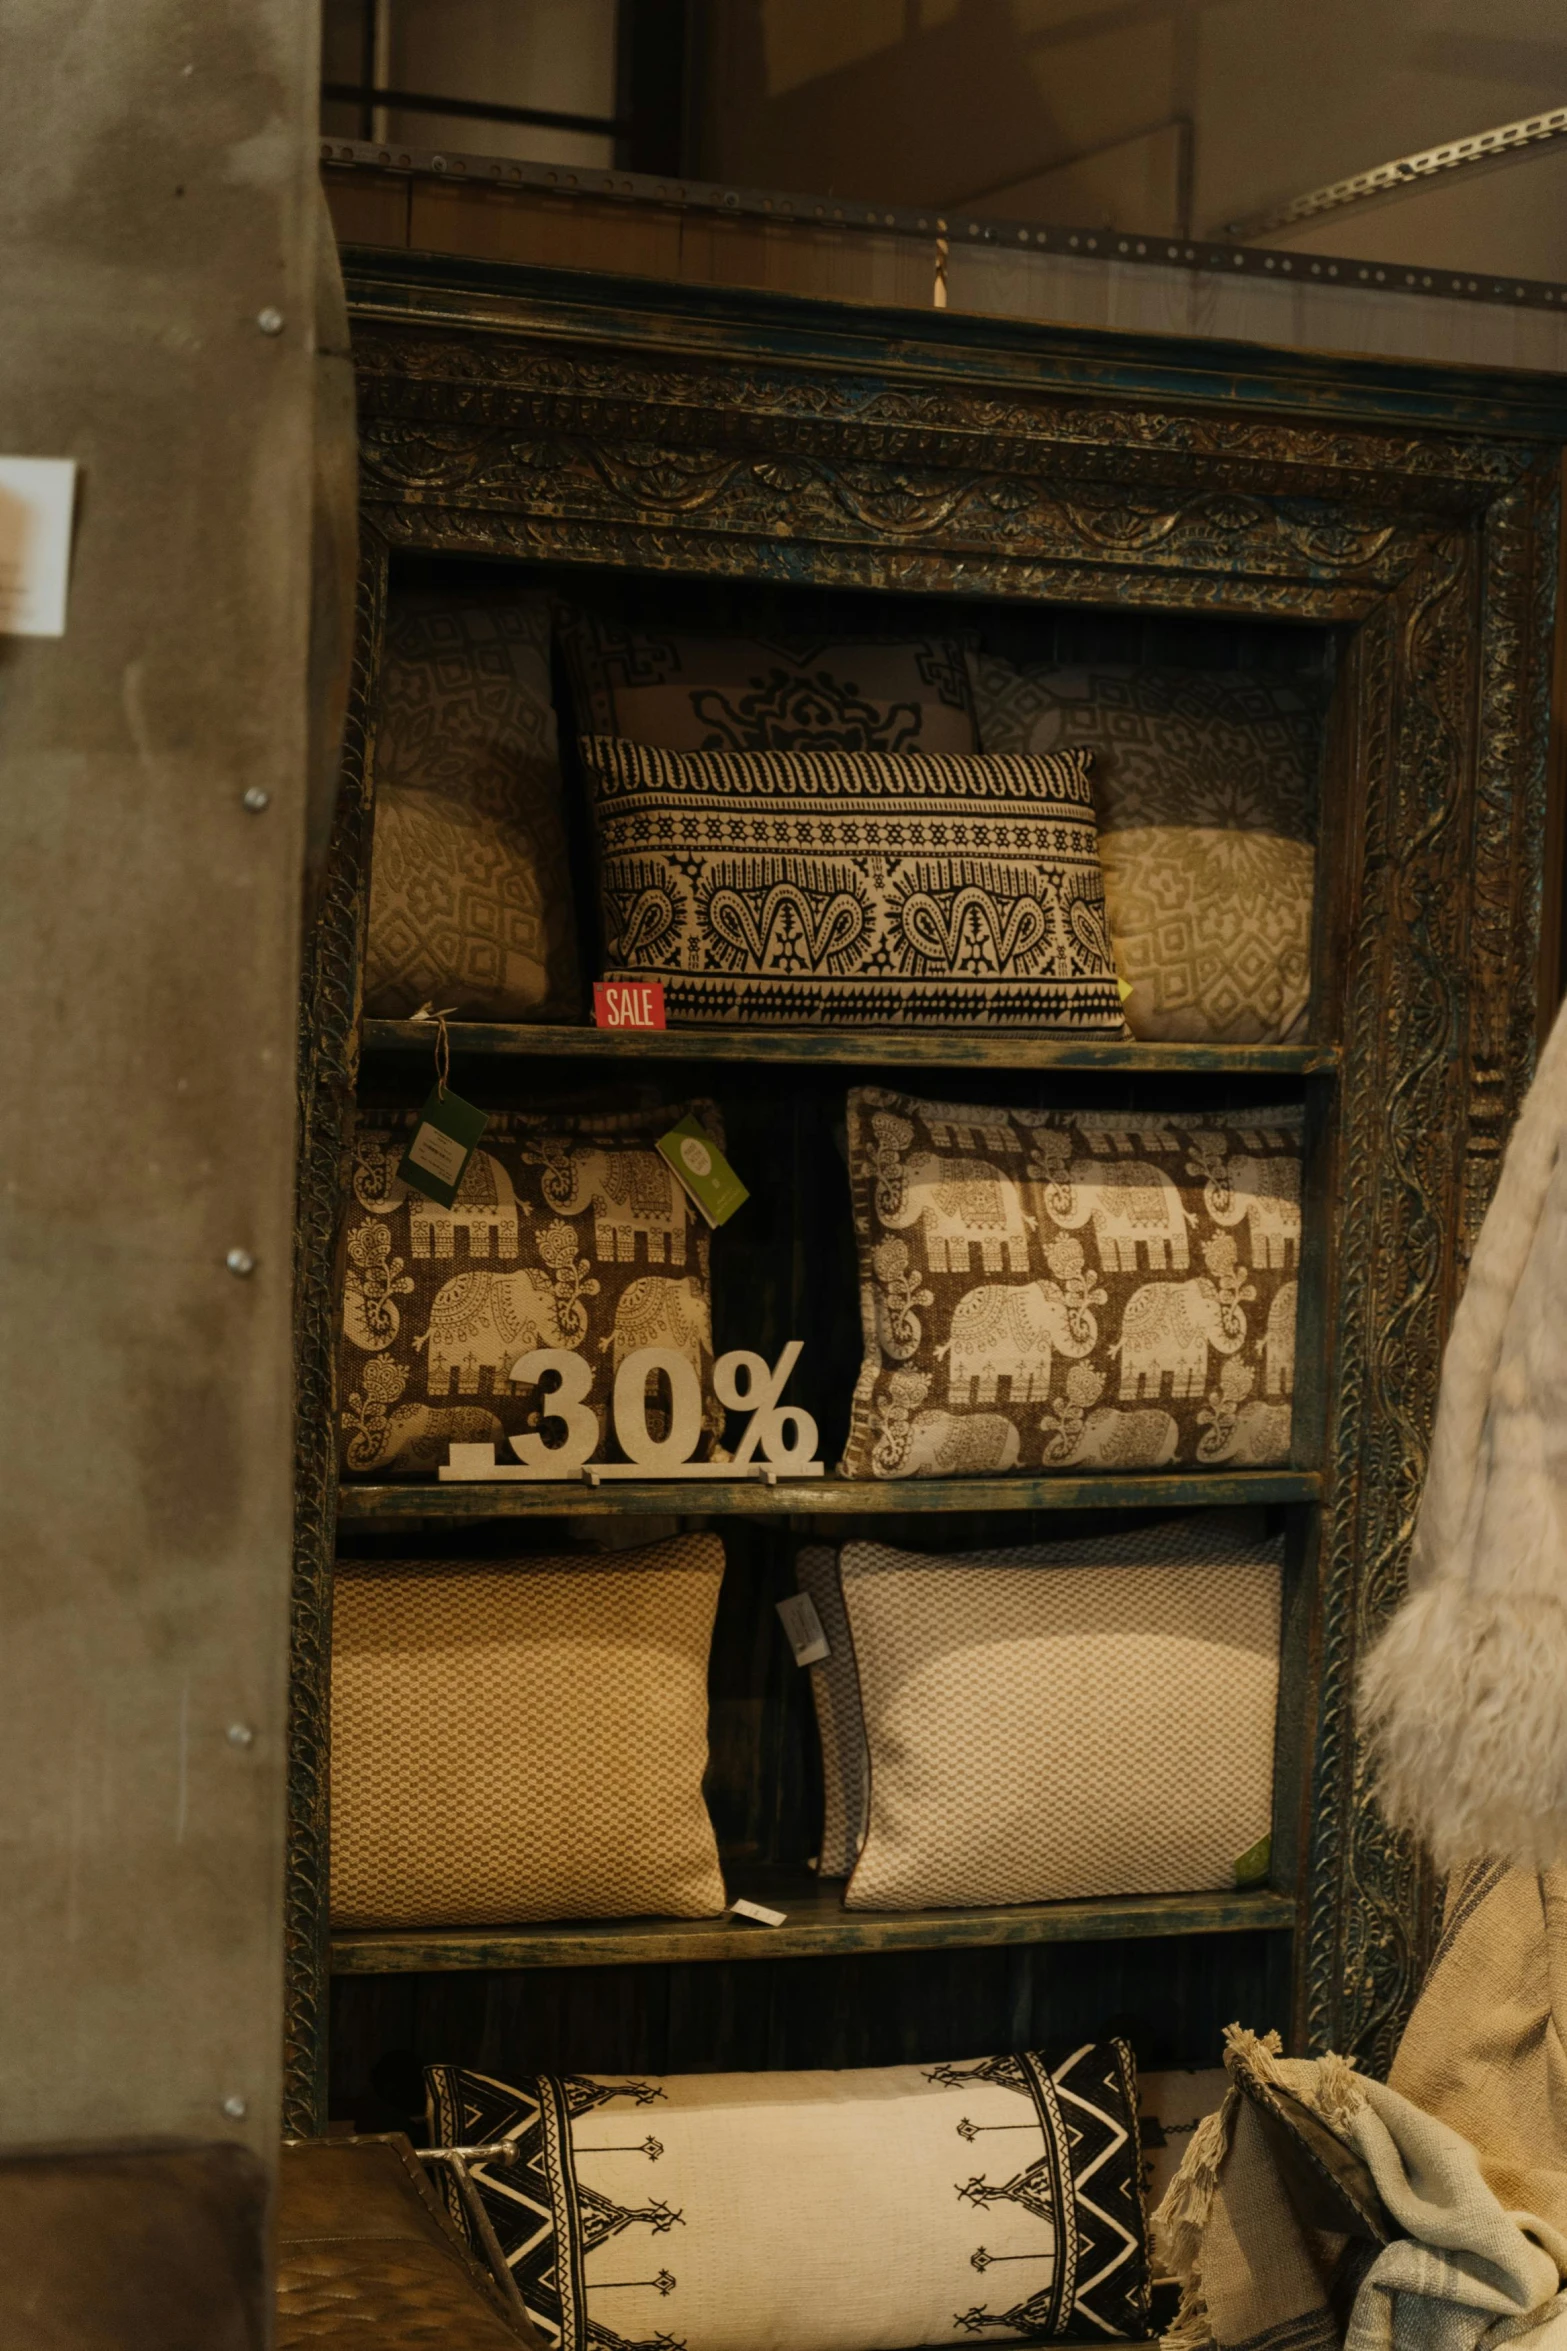 a teddy bear sitting on top of a chair in a room, sitting on a store shelf, intricate details in the frames, cushions, middle eastern details